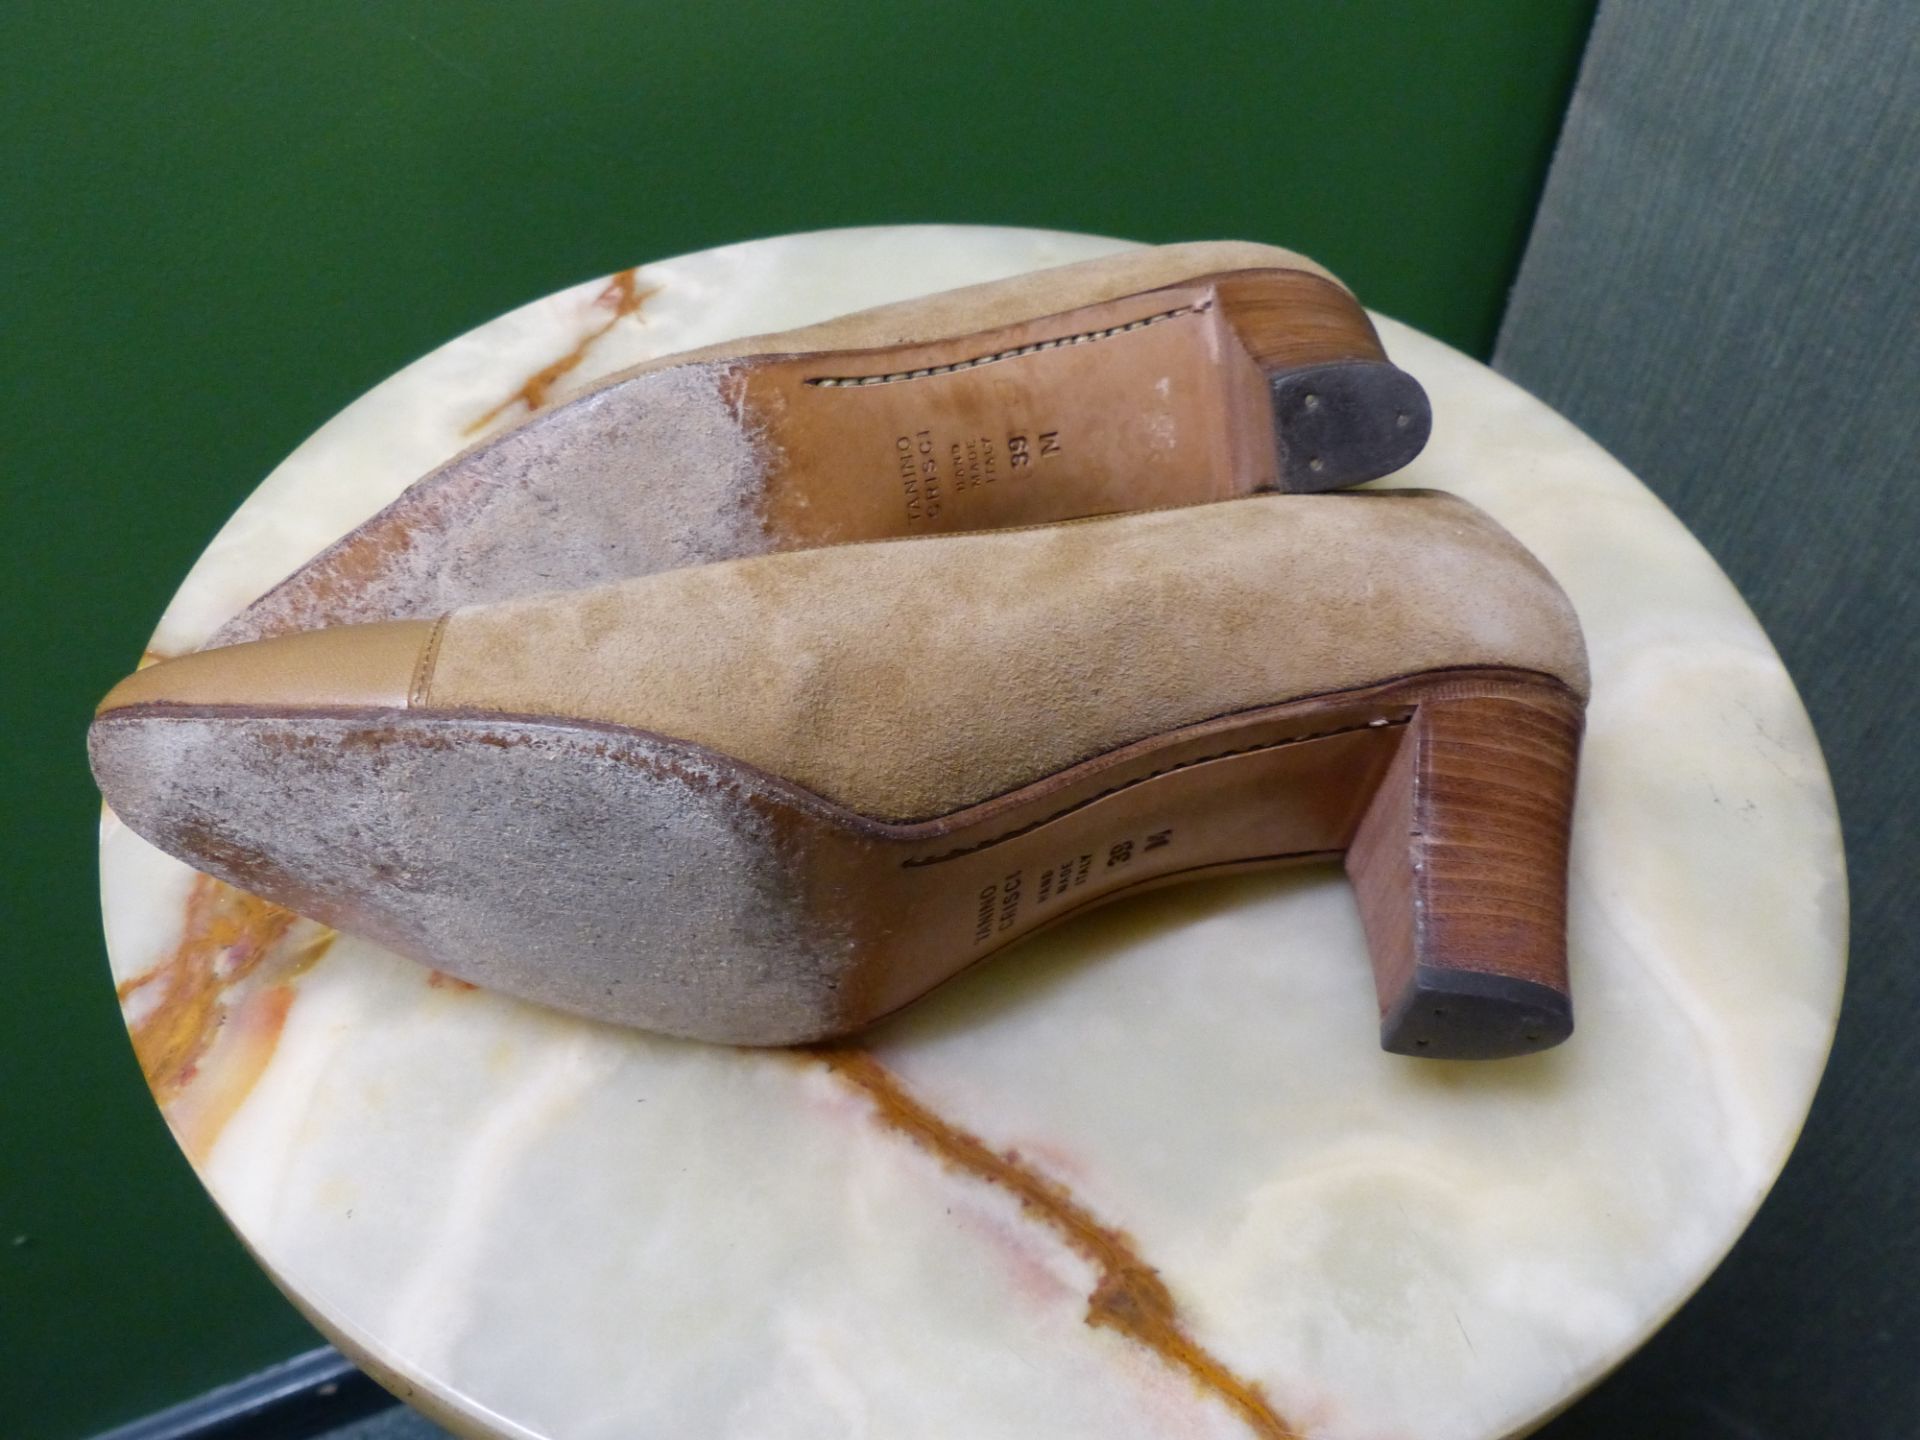 SHOES. TANINO CRISCI LEATHER AND SUEDE CAMEL HEALS EUR SIZE 39. UNUTZER LEATHER BROWN FLATS EUR SIZE - Image 8 of 8